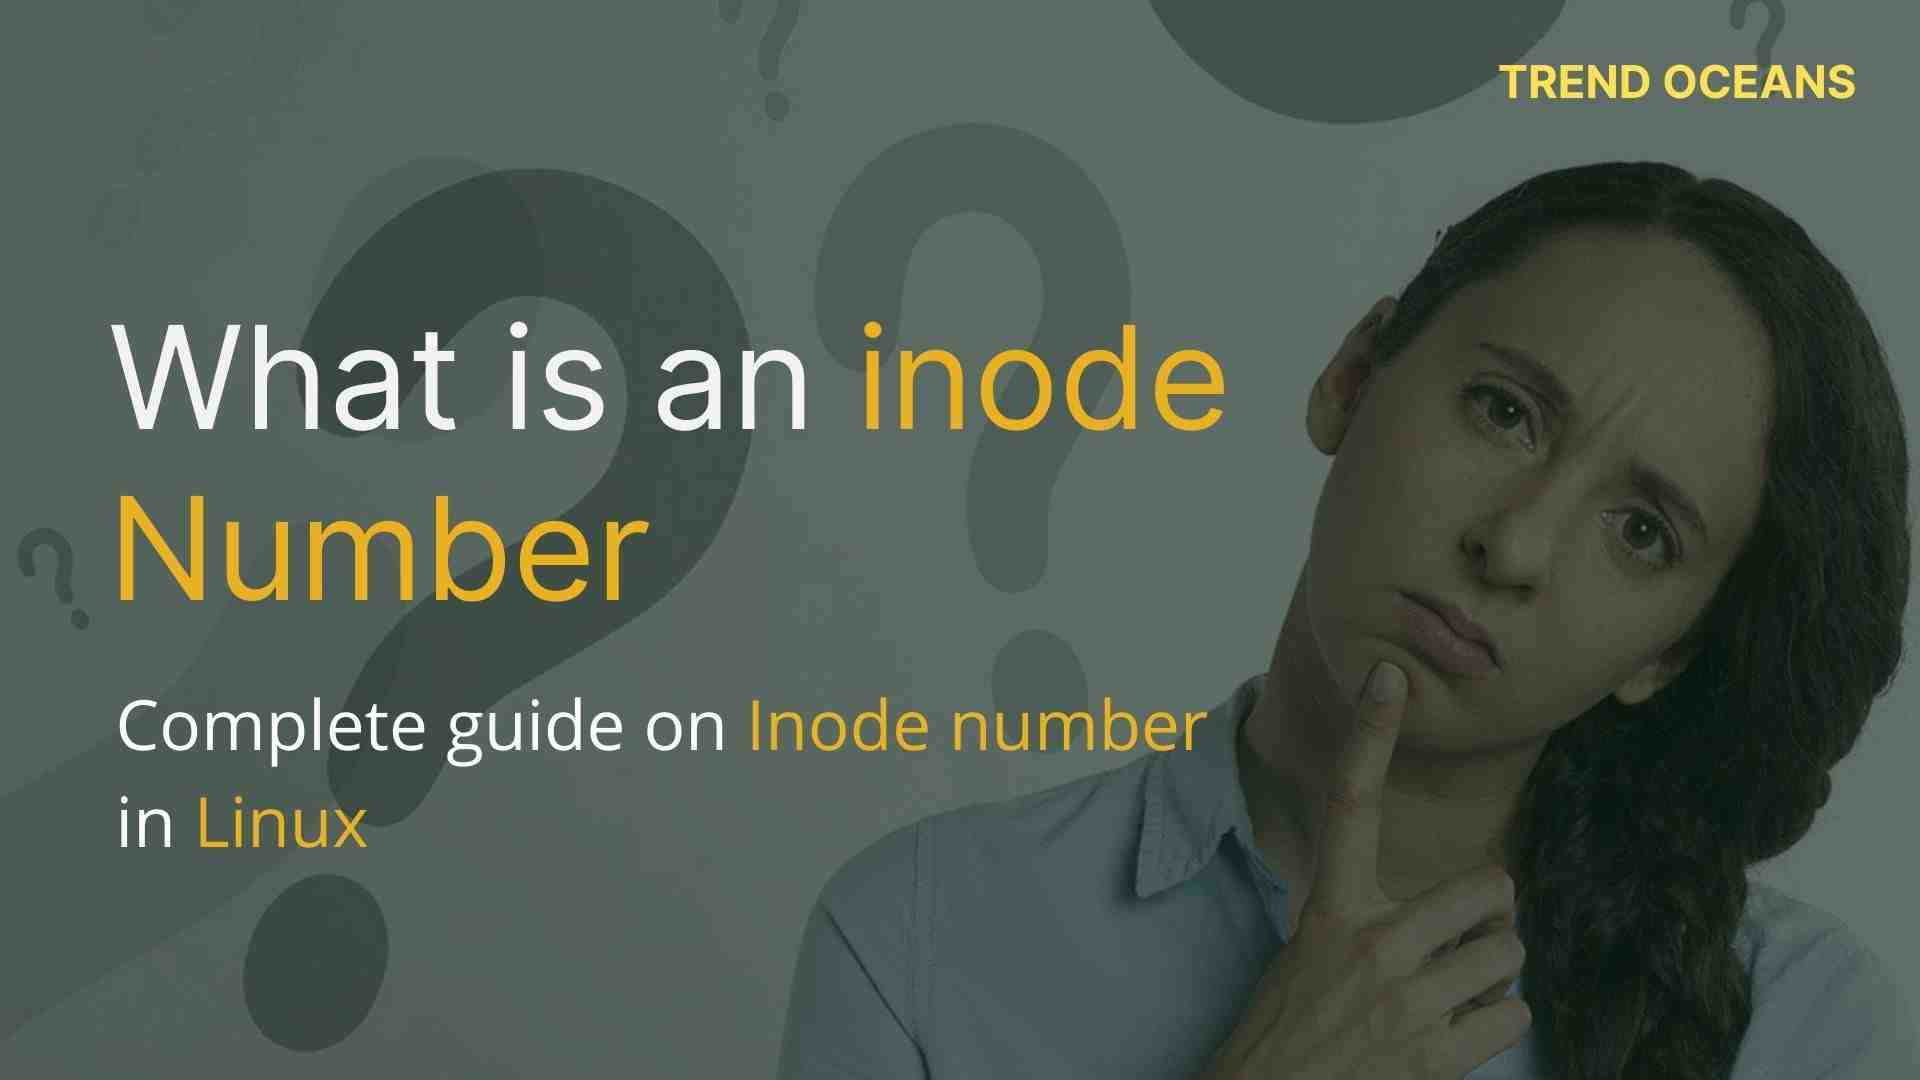 What is an inode number